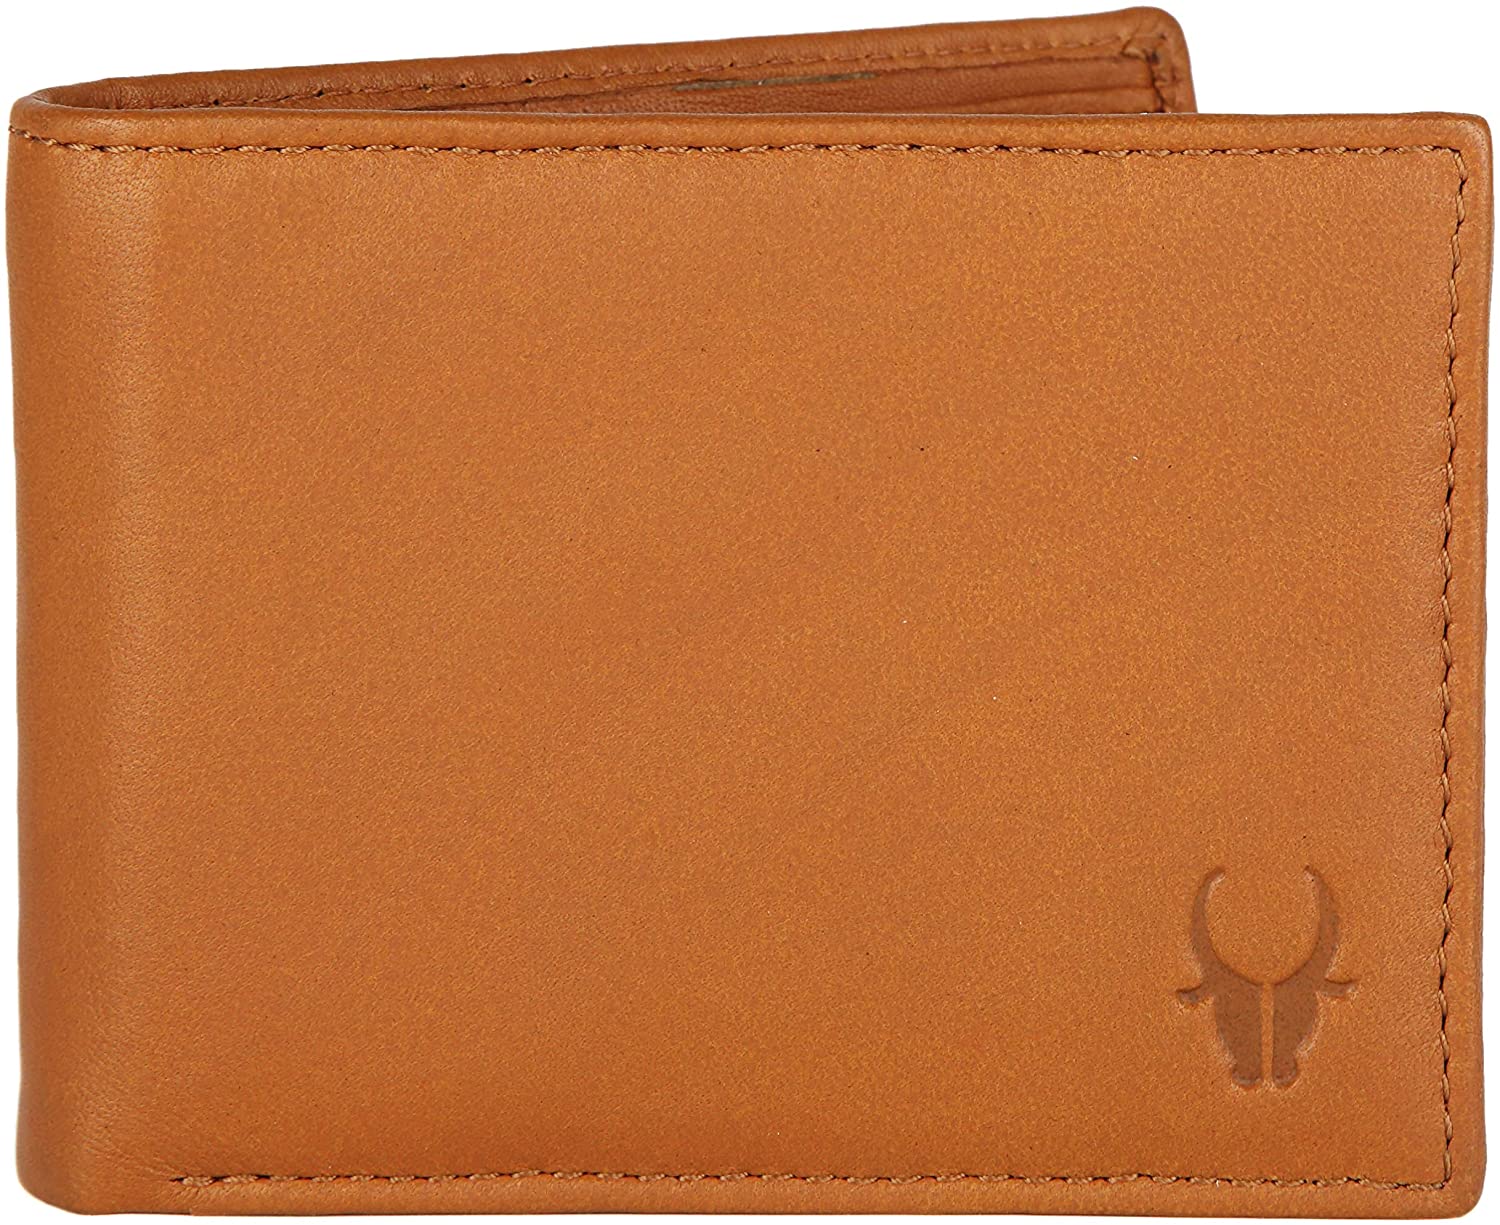 <strong>1. WildHorn RFID Protected Genuine Leather Wallet</strong>